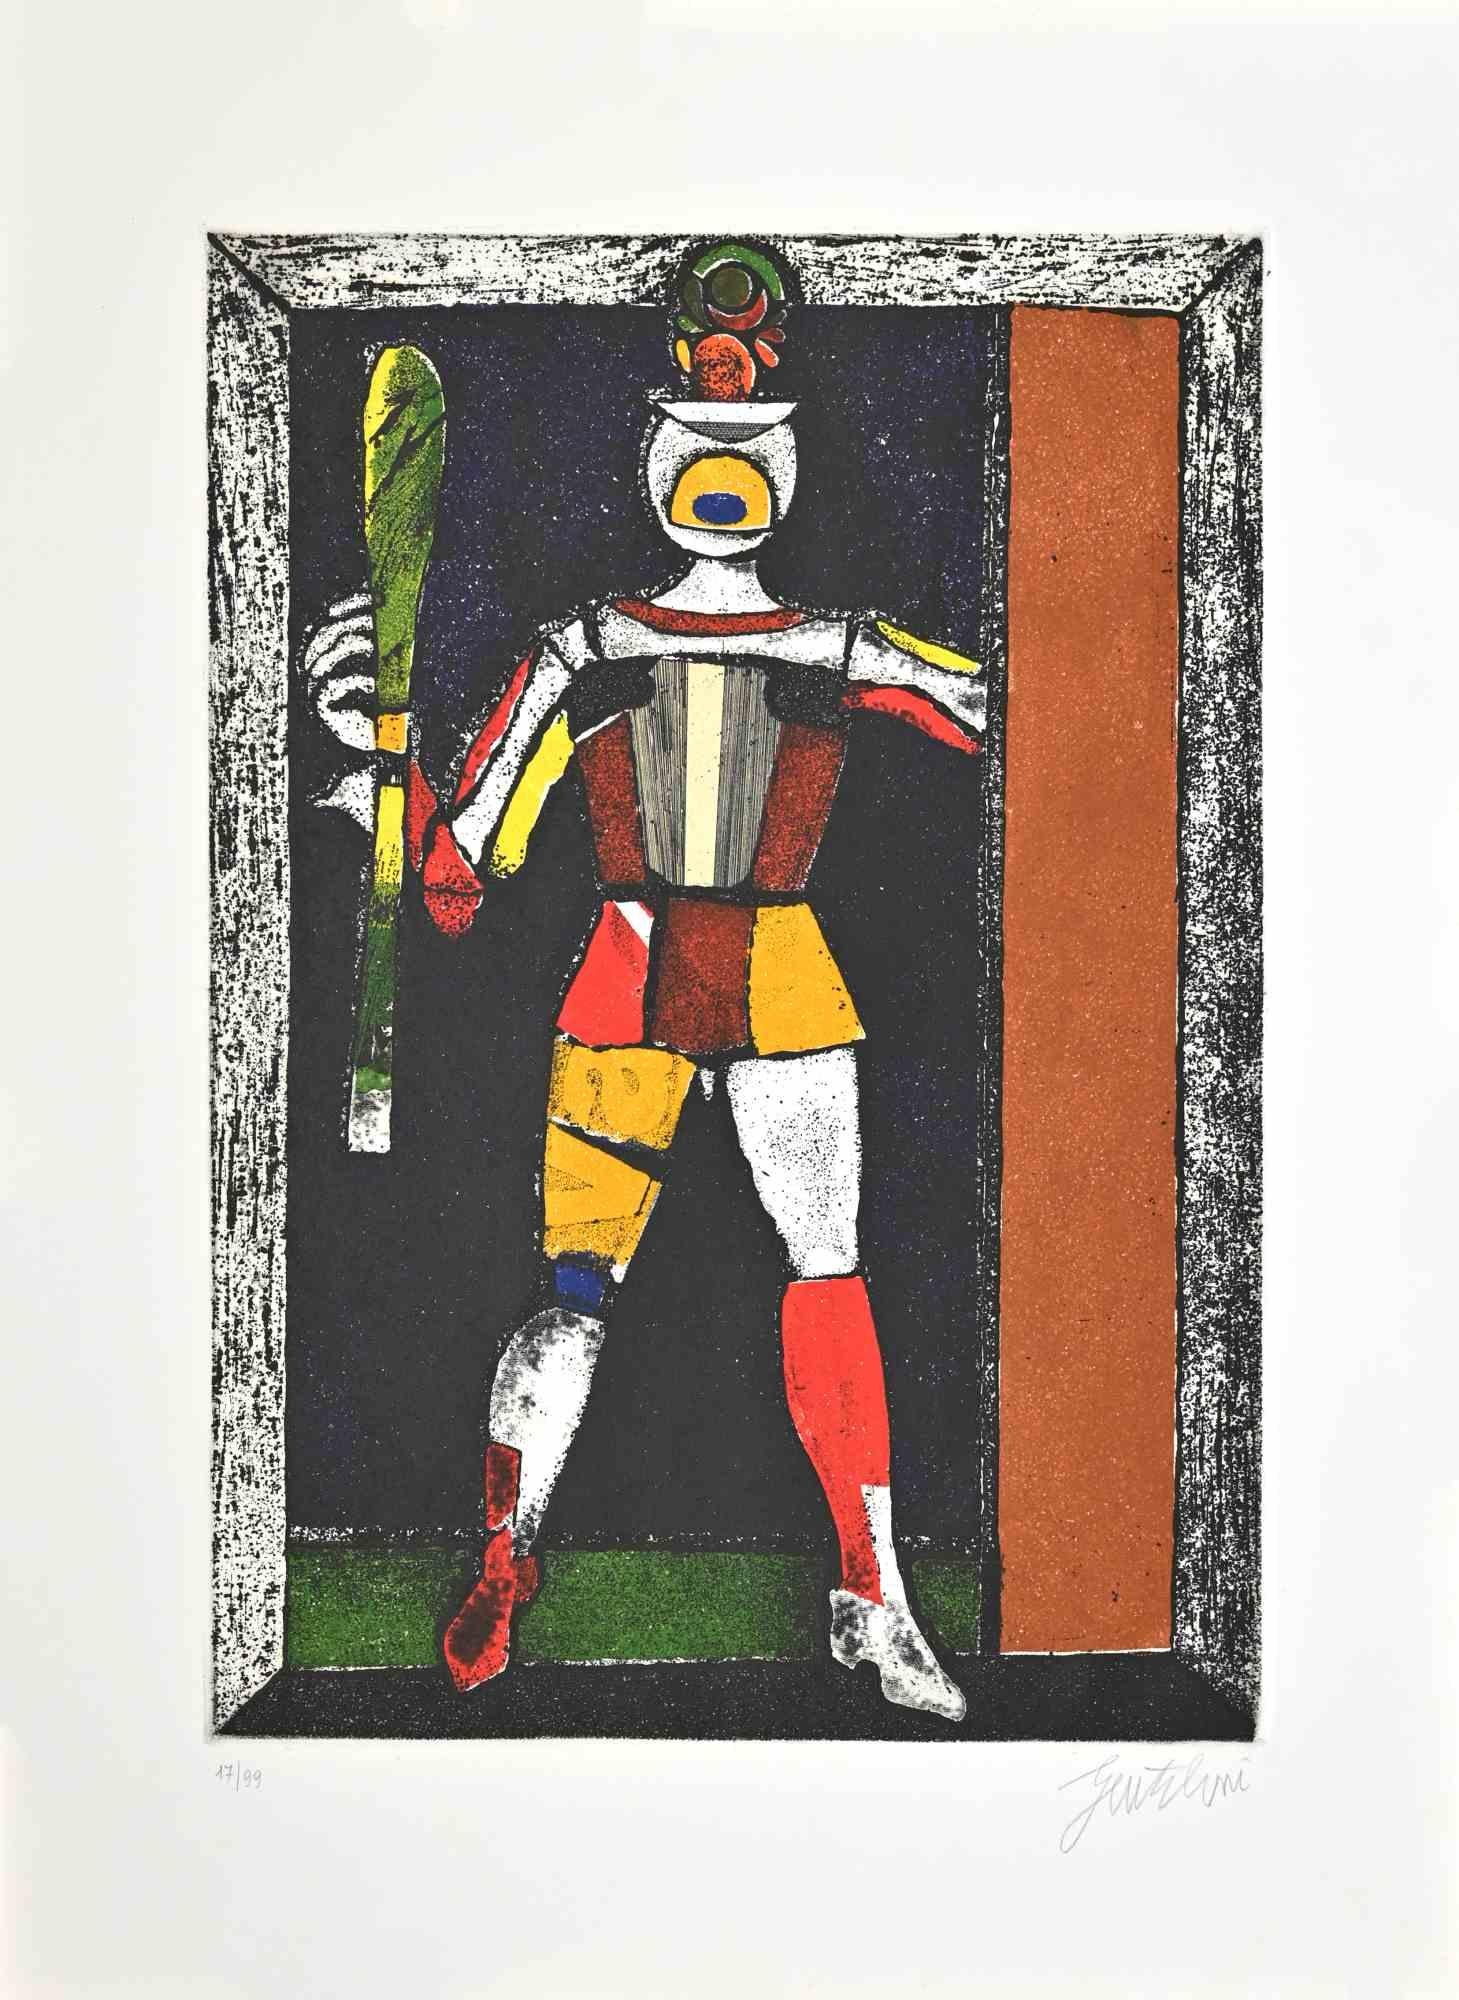 Knave of Sticks - Etching by Franco Gentilini - 1970s